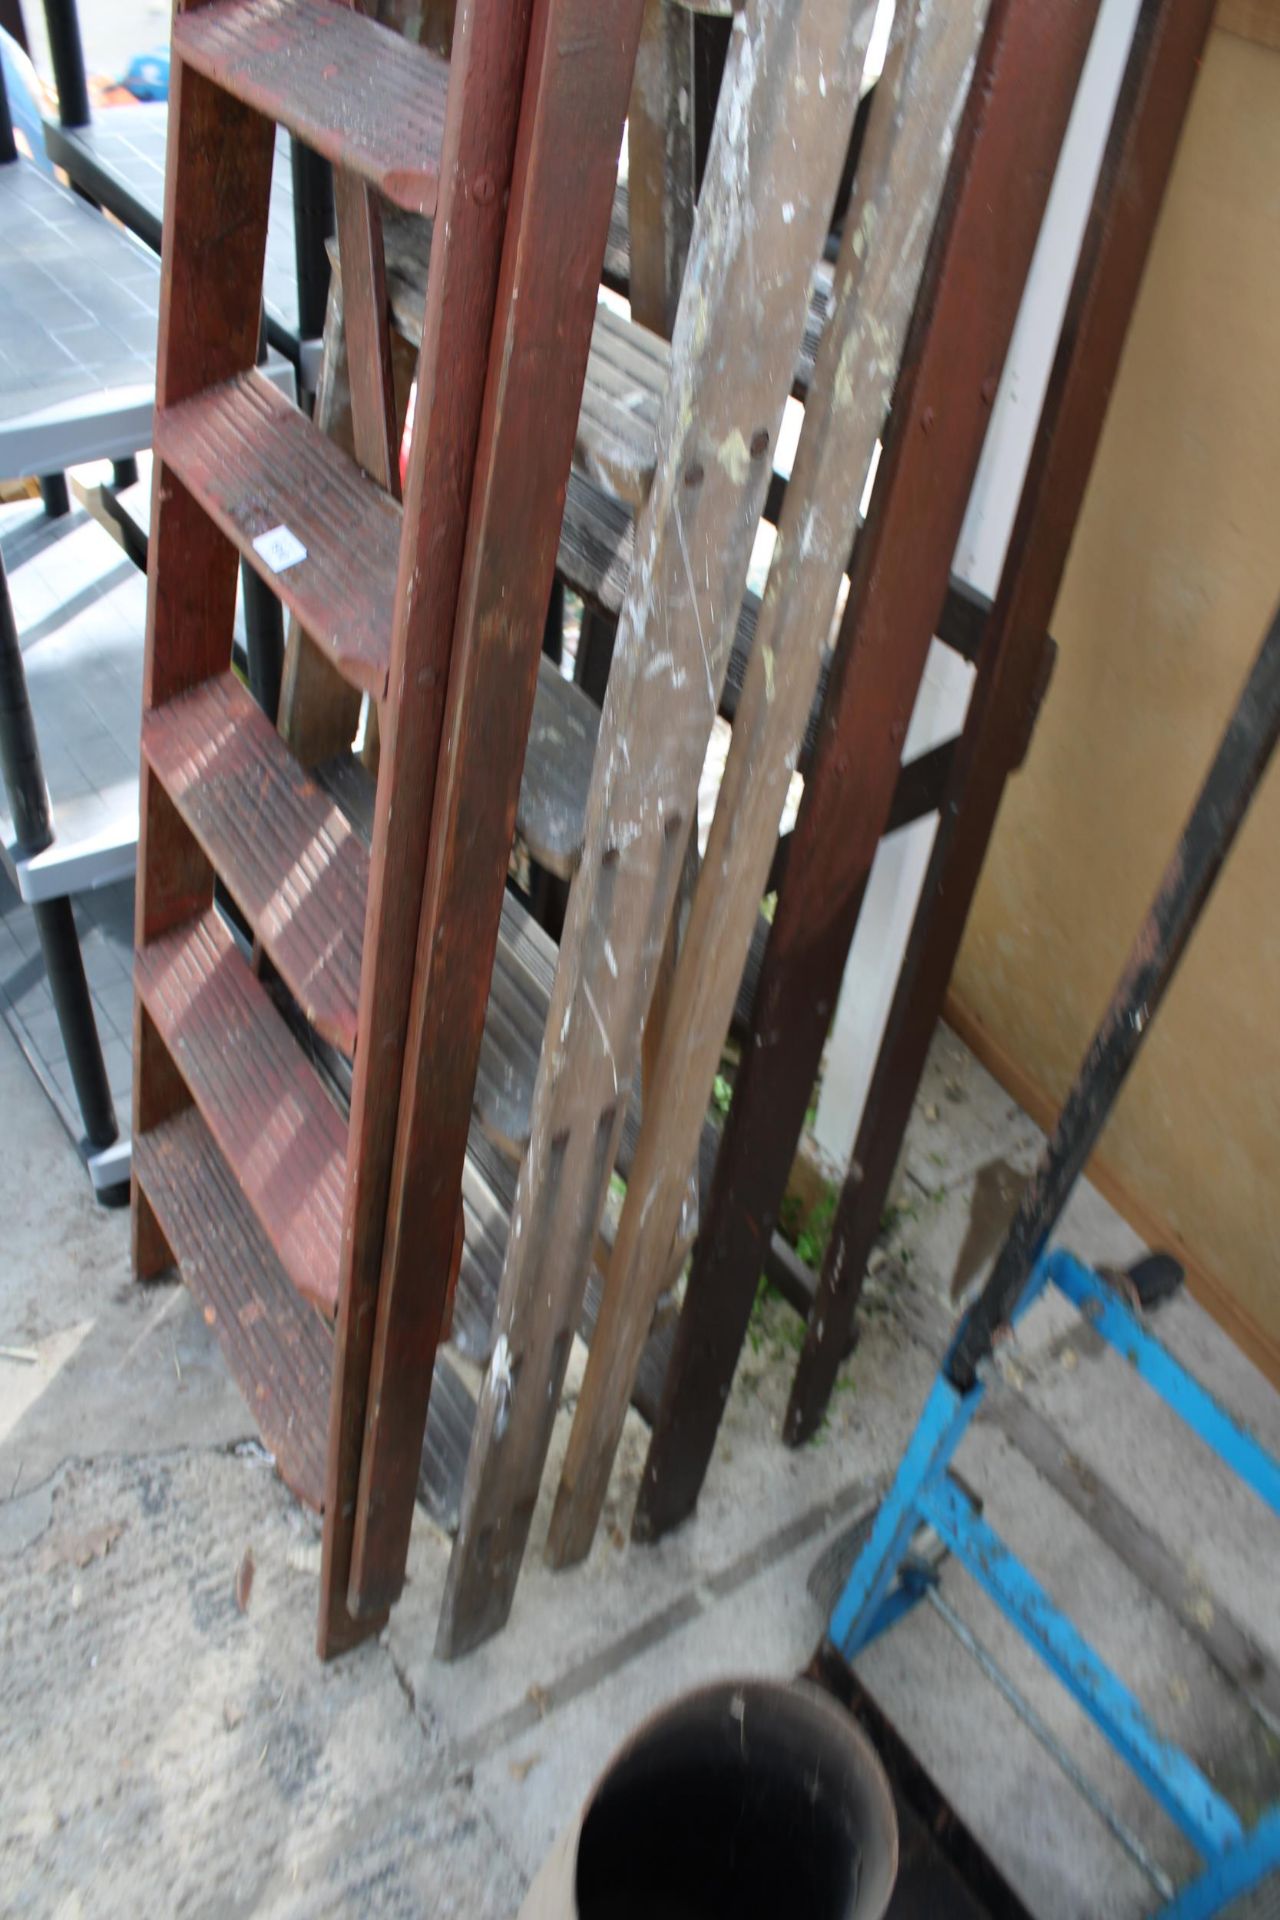 A VINTAGE WOODEN SIX RUNG STEP LADDER AND A VINTAGE WOODEN 5 RUNG STEP LADDER - Bild 2 aus 3